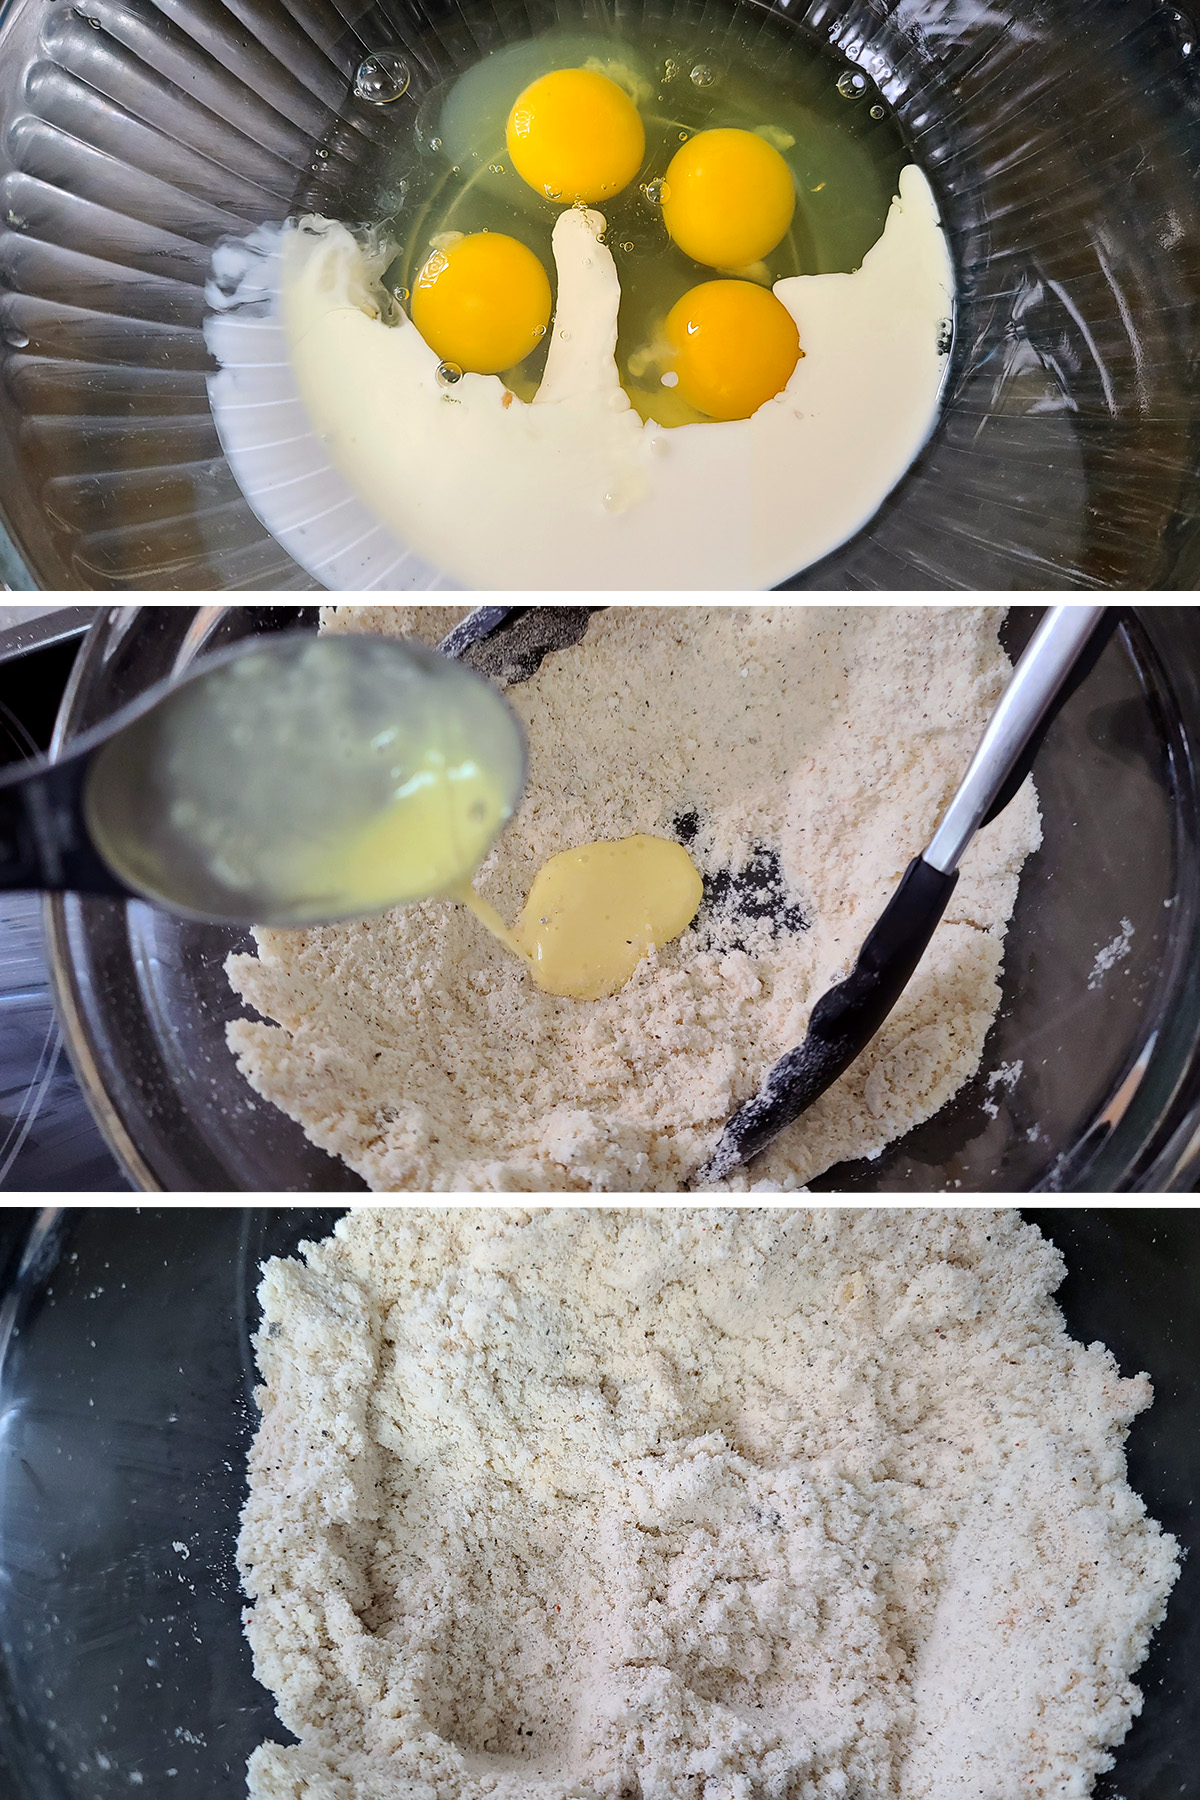 A 3 part image showing a bit of the egg mix being added to the dry mix and crumbled.